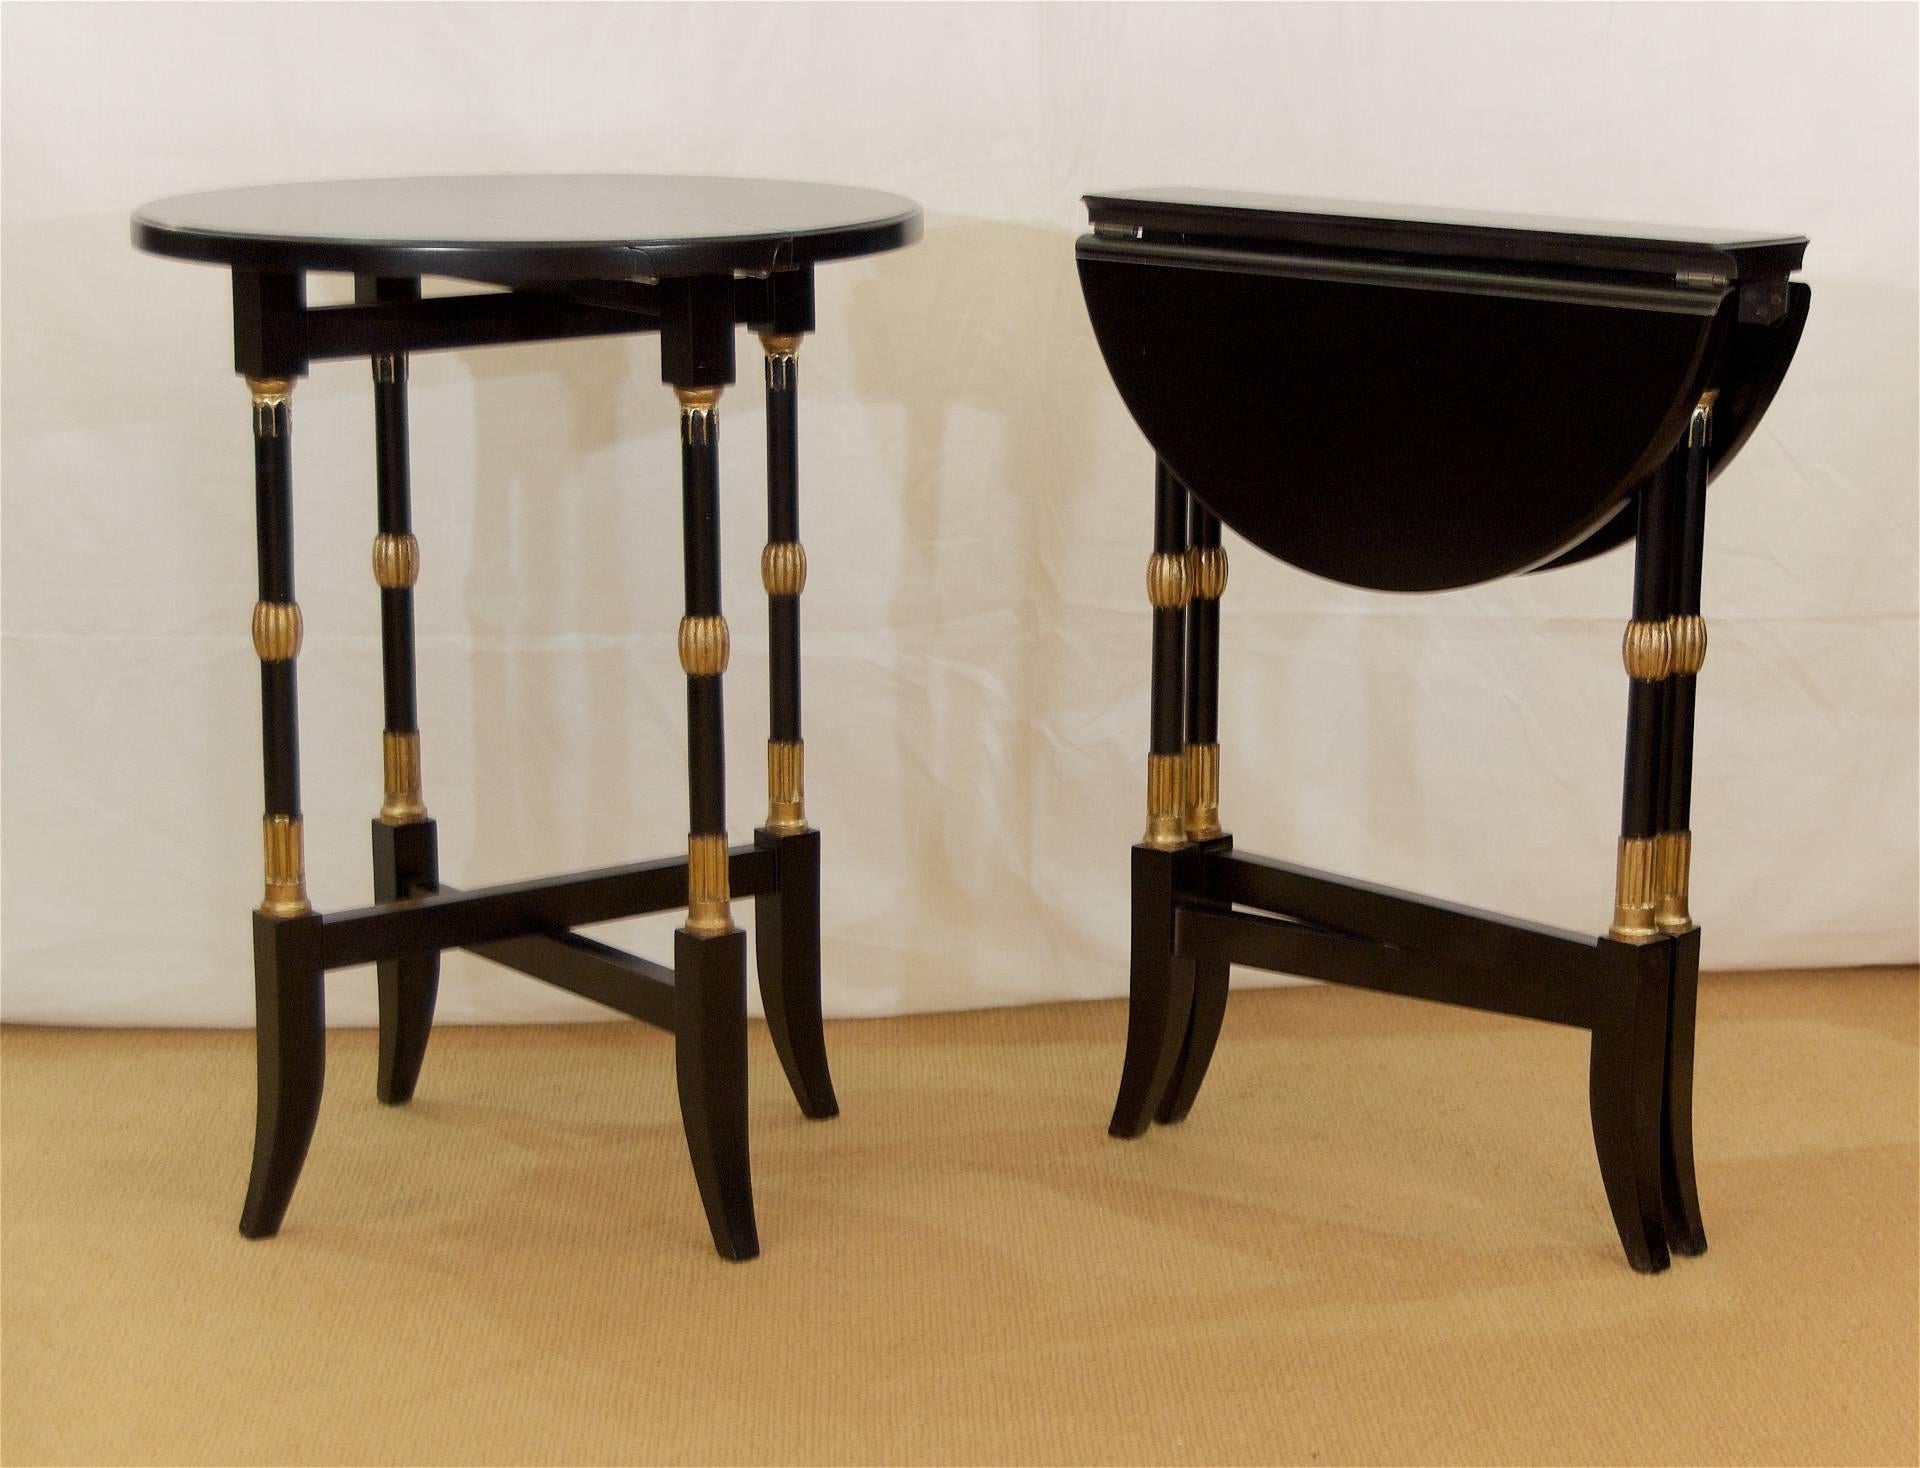 Lacquered Black Lacquer Regency-Style Folding Occasional Tables from the Fontainebleau For Sale